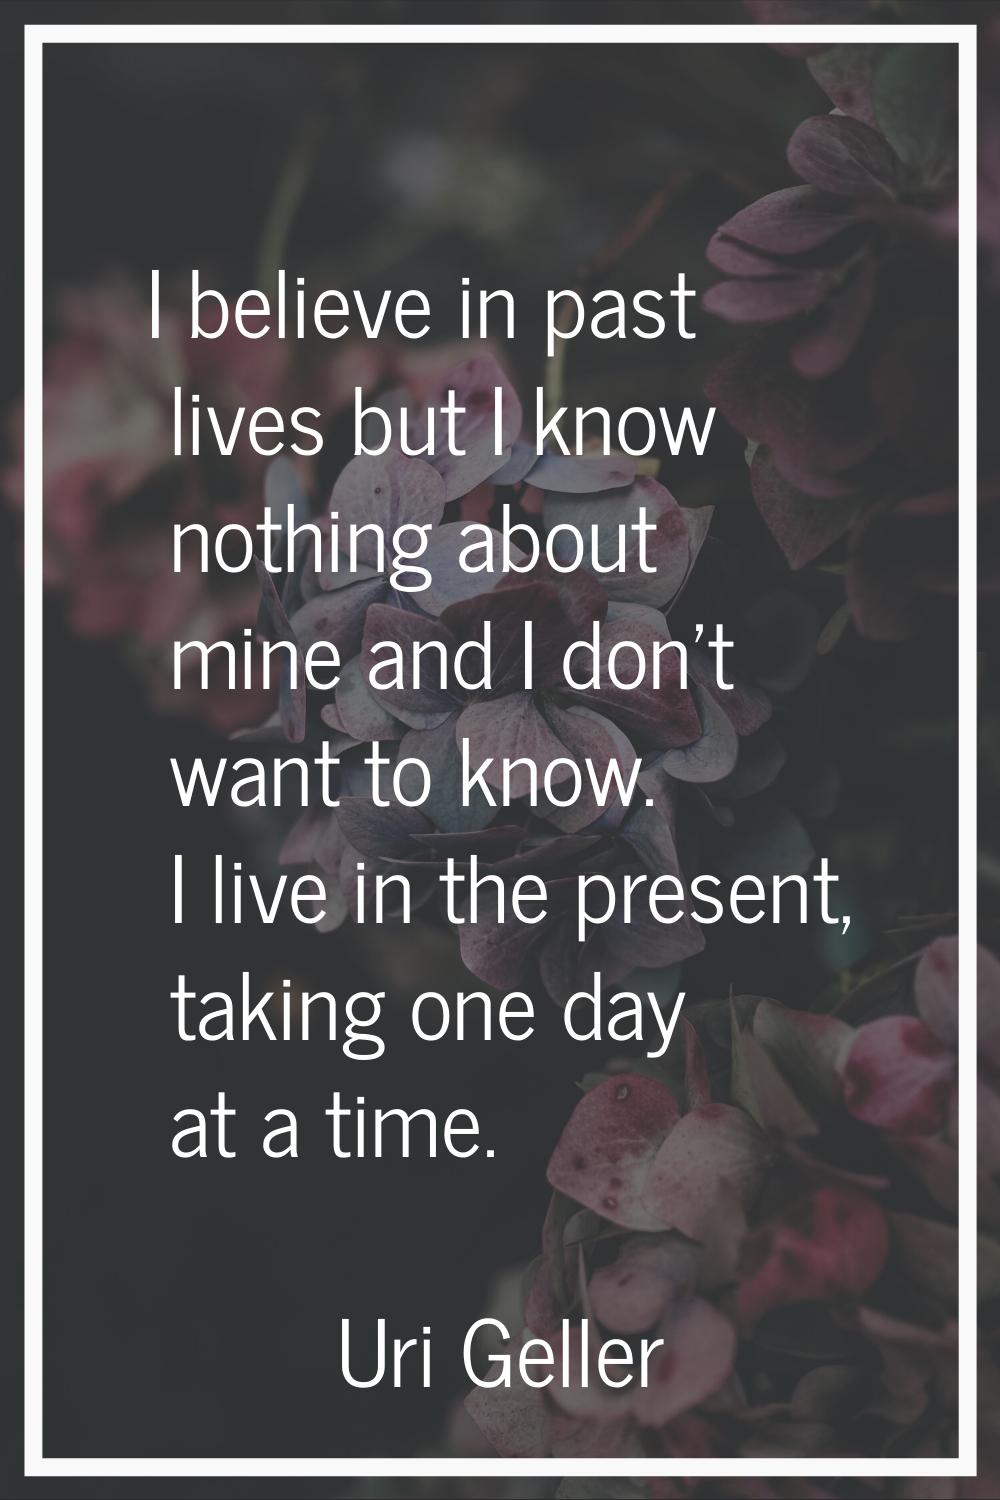 I believe in past lives but I know nothing about mine and I don't want to know. I live in the prese